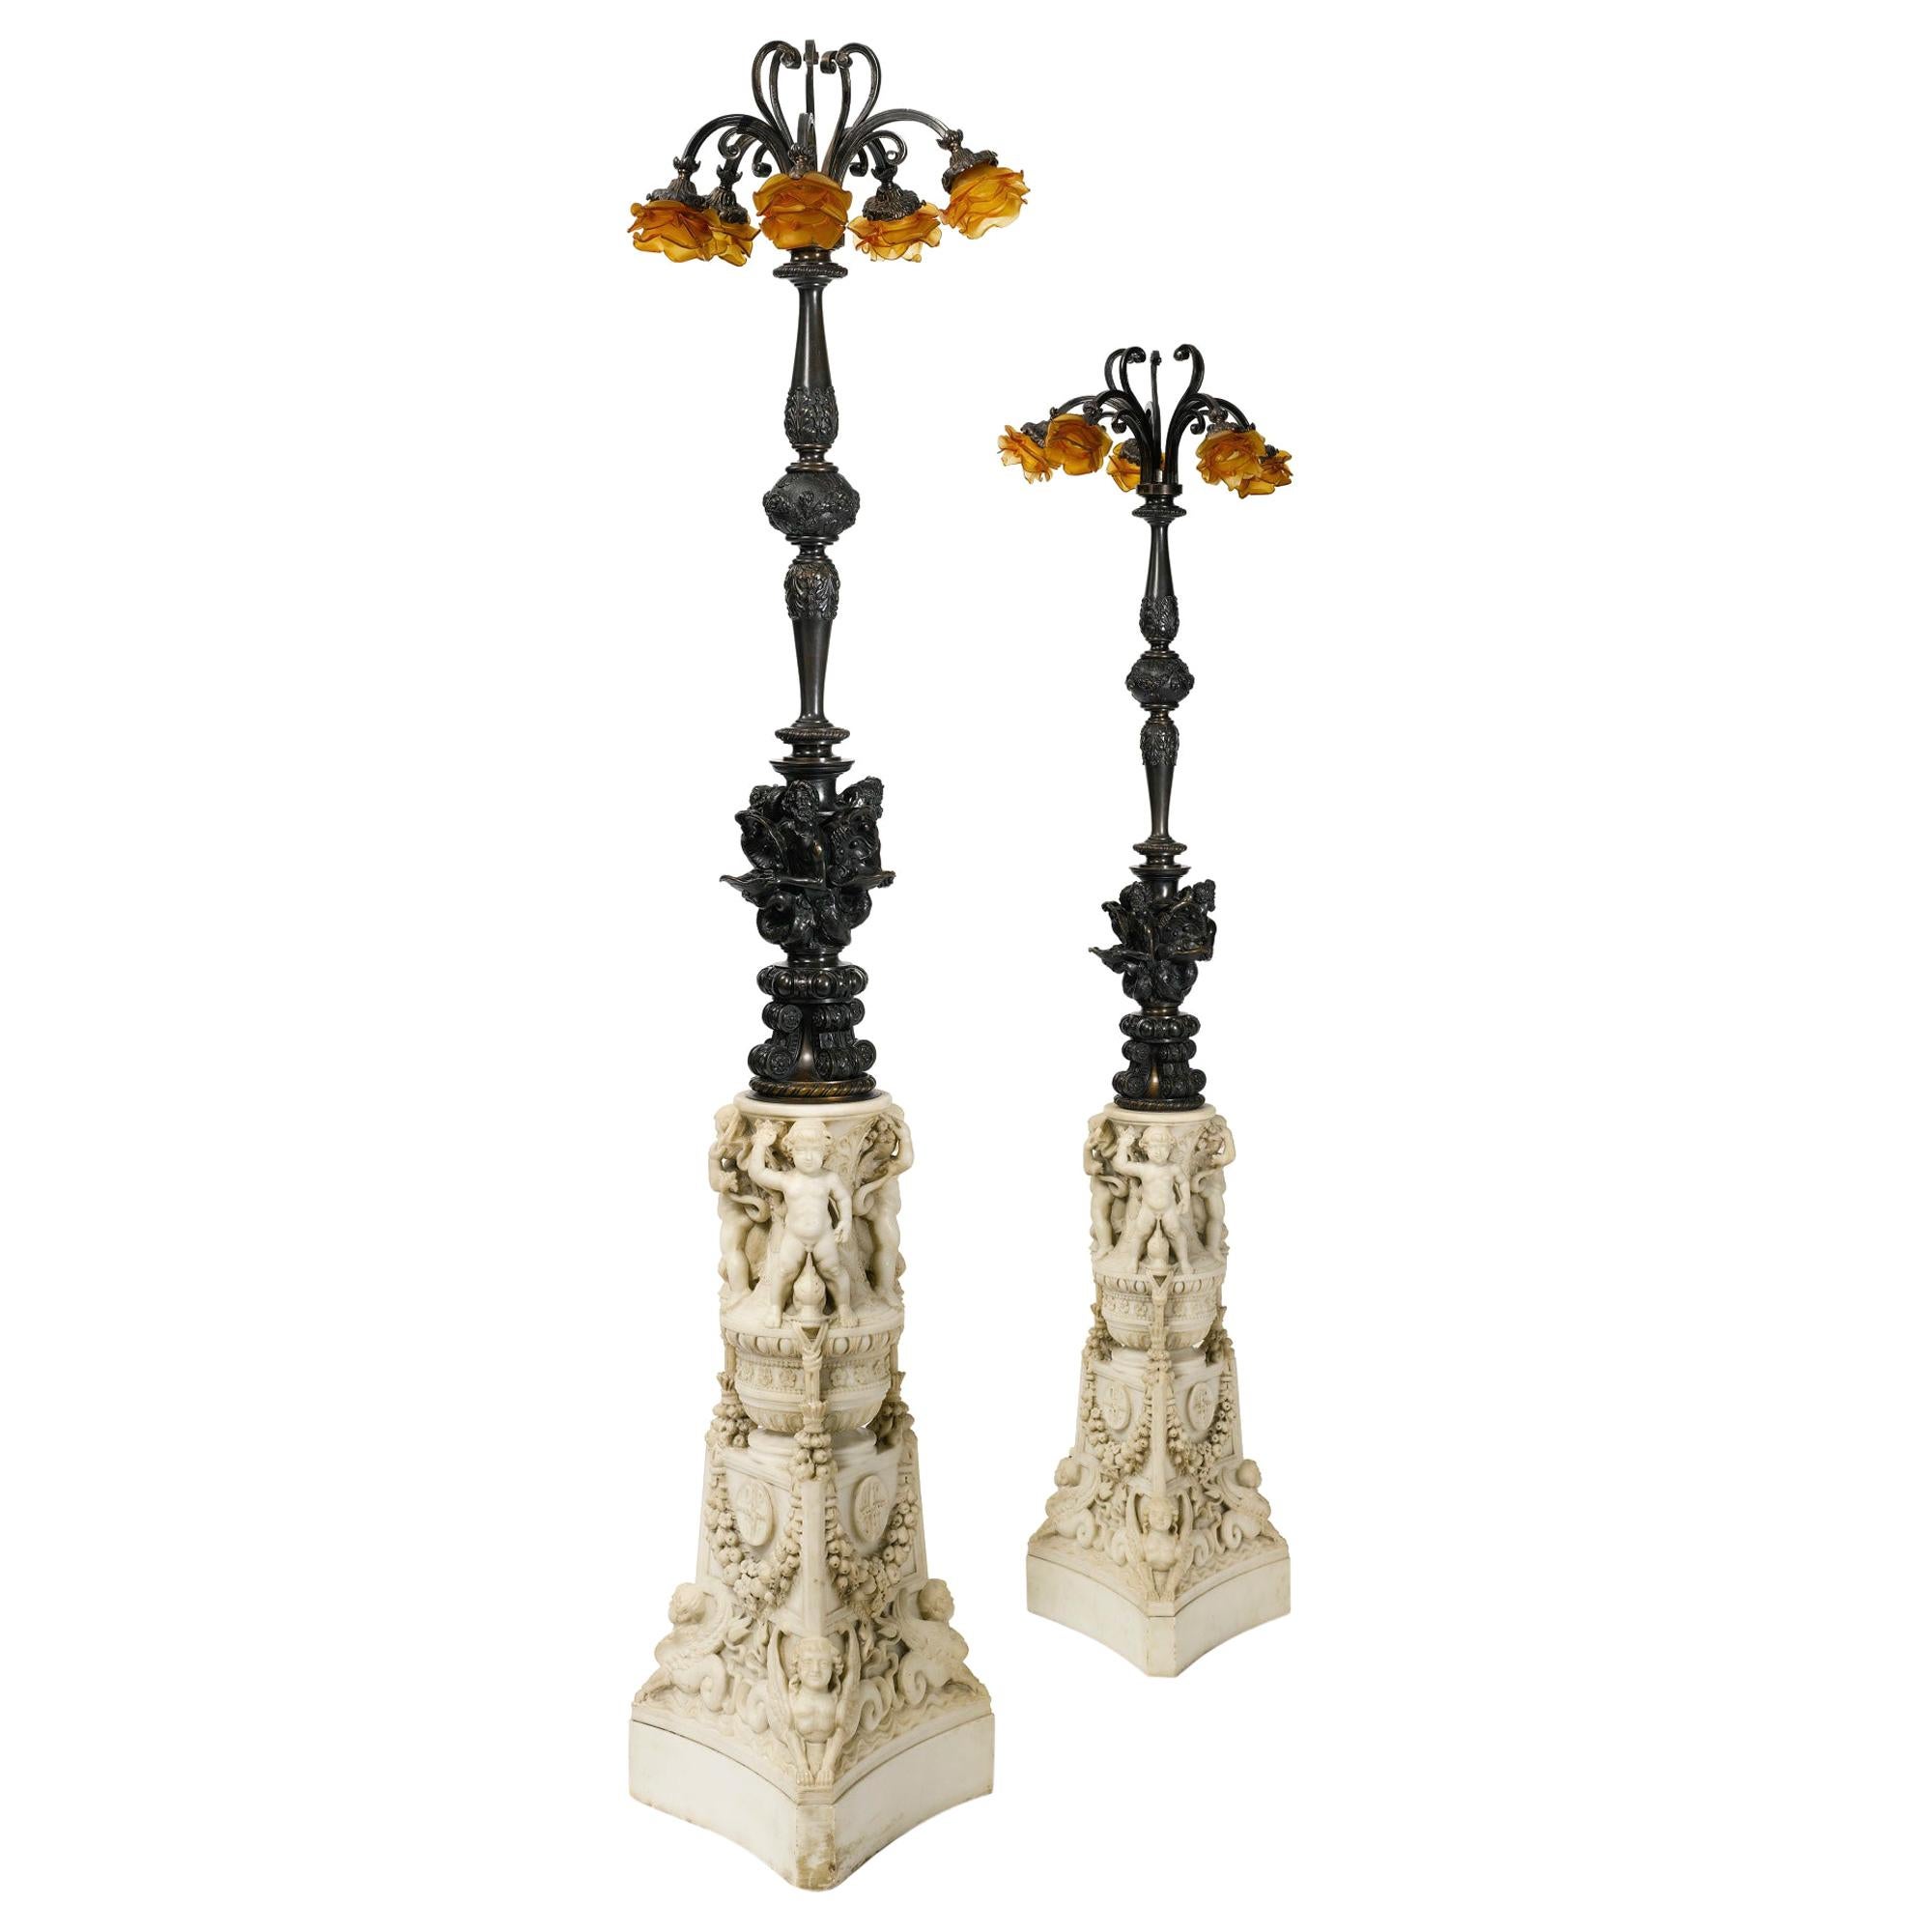 Pair of Néo-Renaissance Patinated Bronze and Carved Marble Floor Lamps